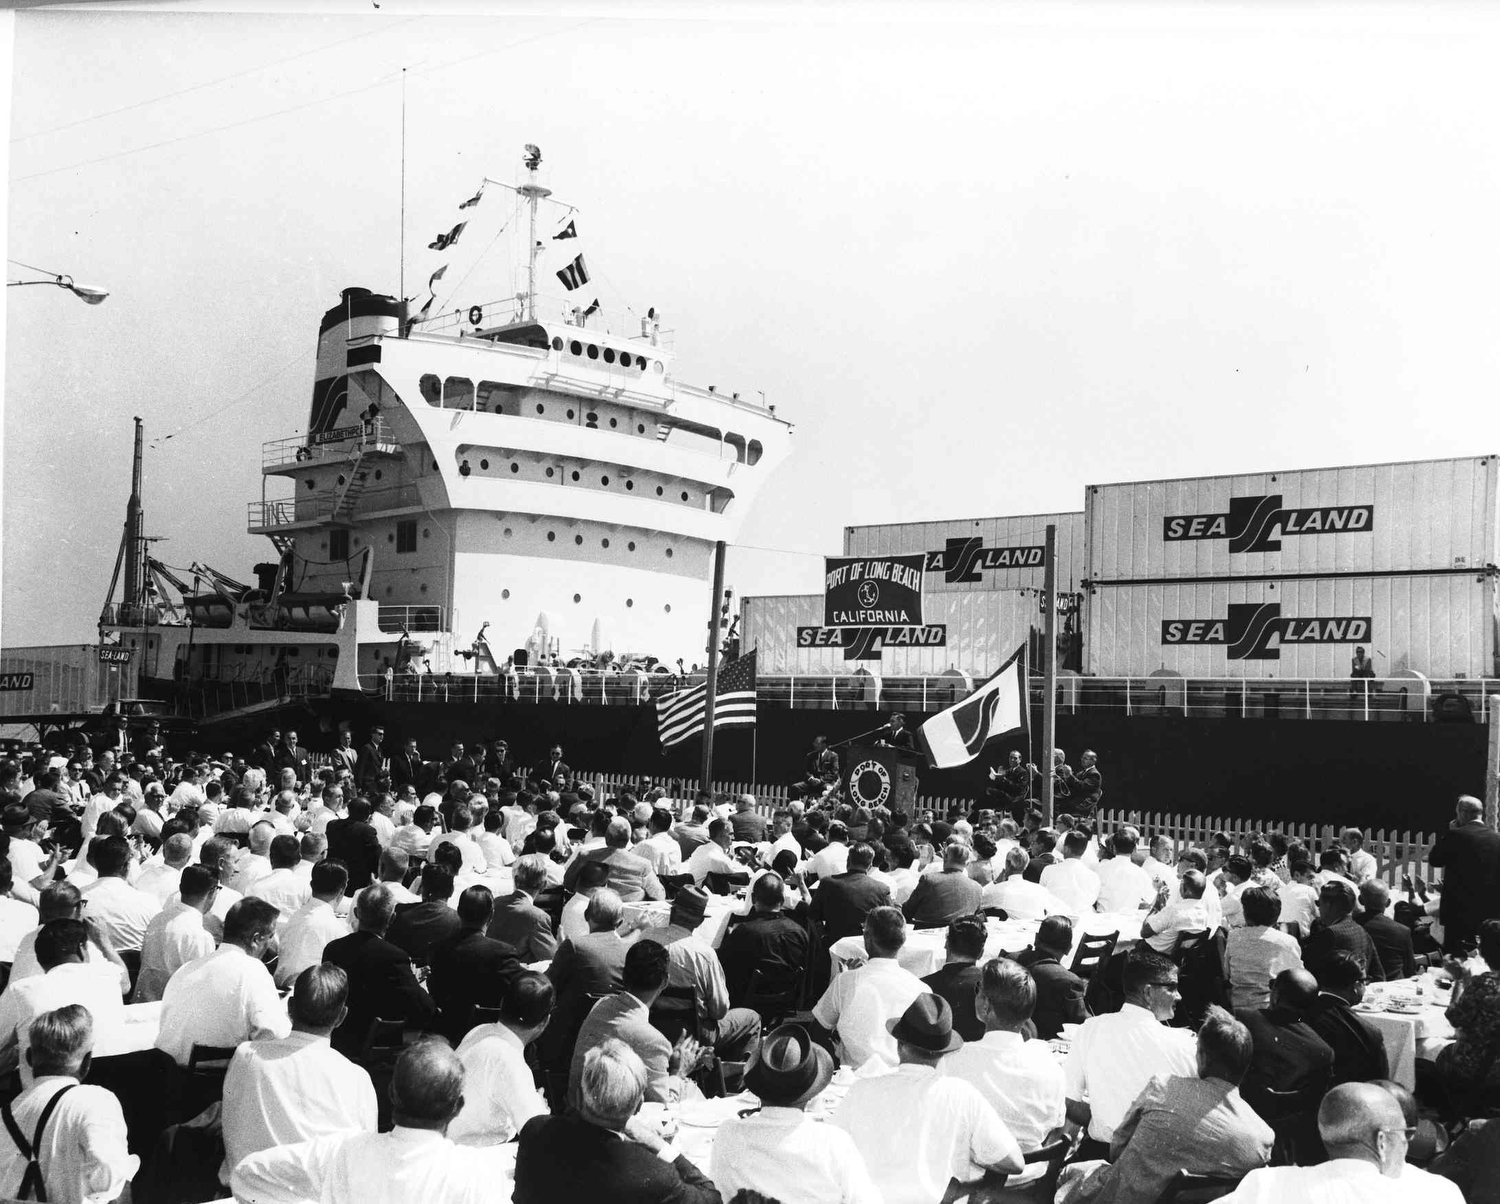 The SS Elizabethport is the first container vessel to call at the Port of Long Beach in 1962, heralding a new era in shipping.